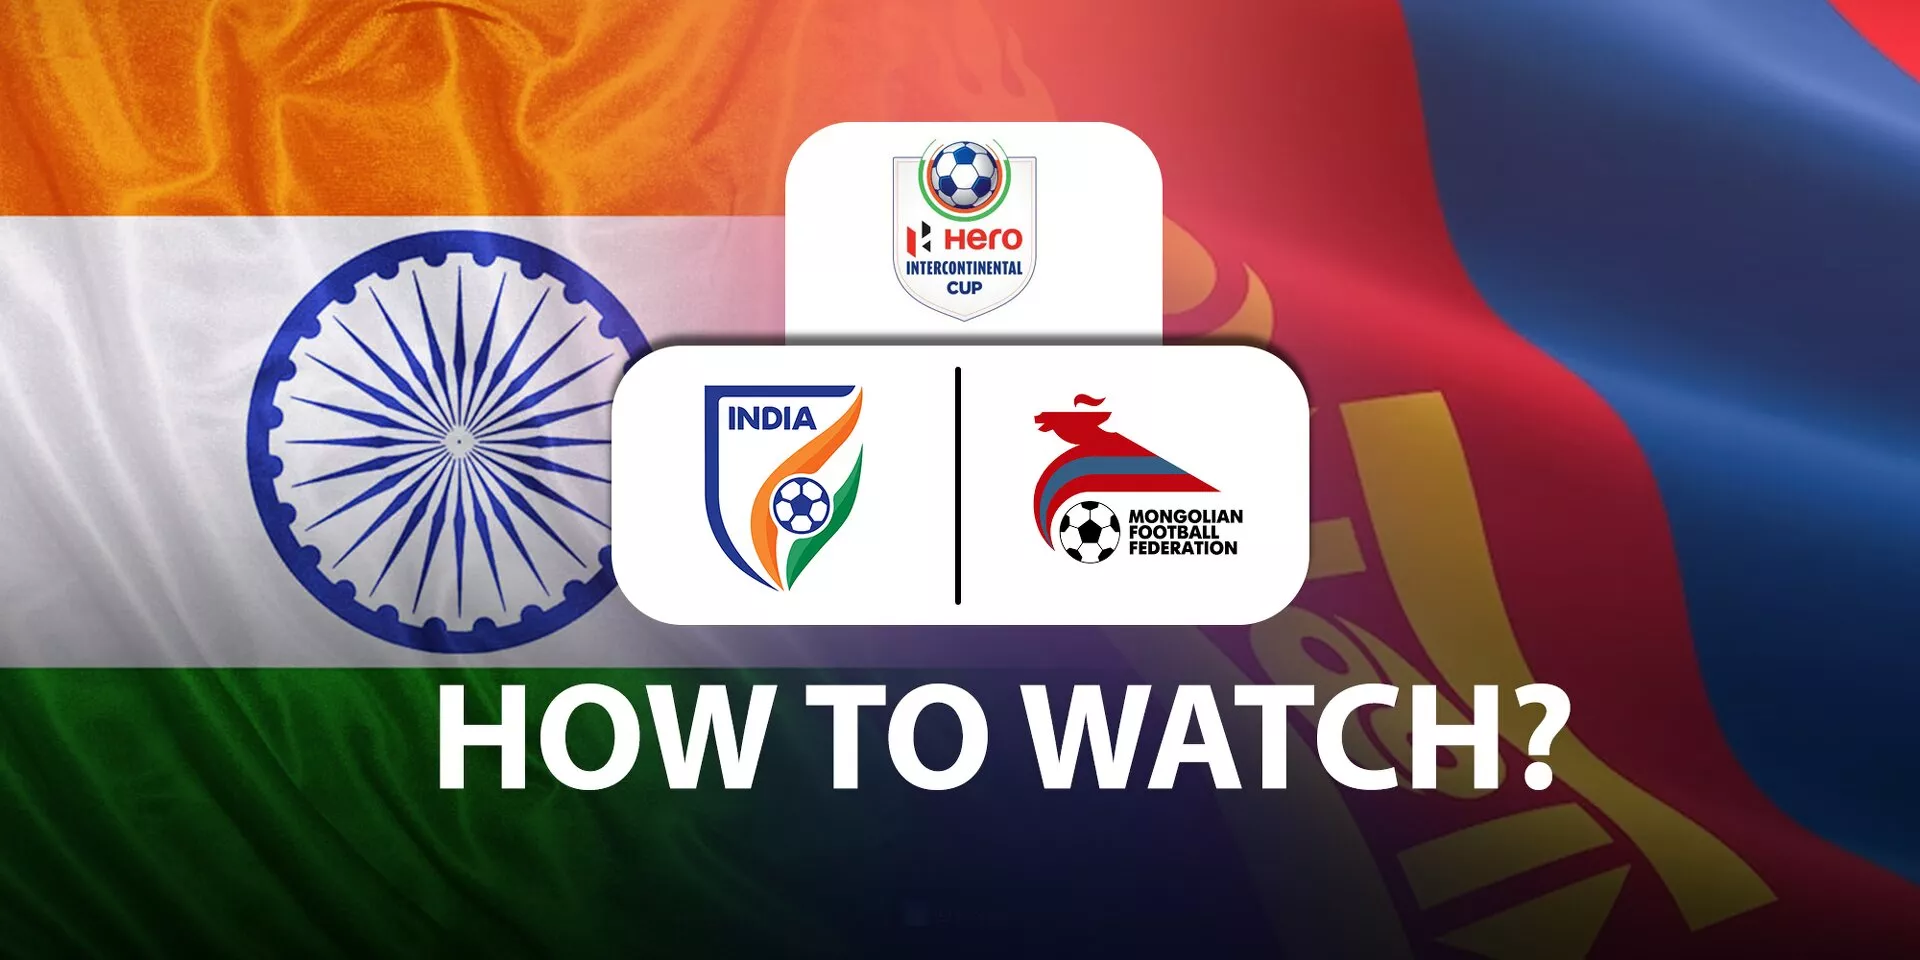 Hero Intercontinental Cup 2023 India vs Mongolia Where and how to